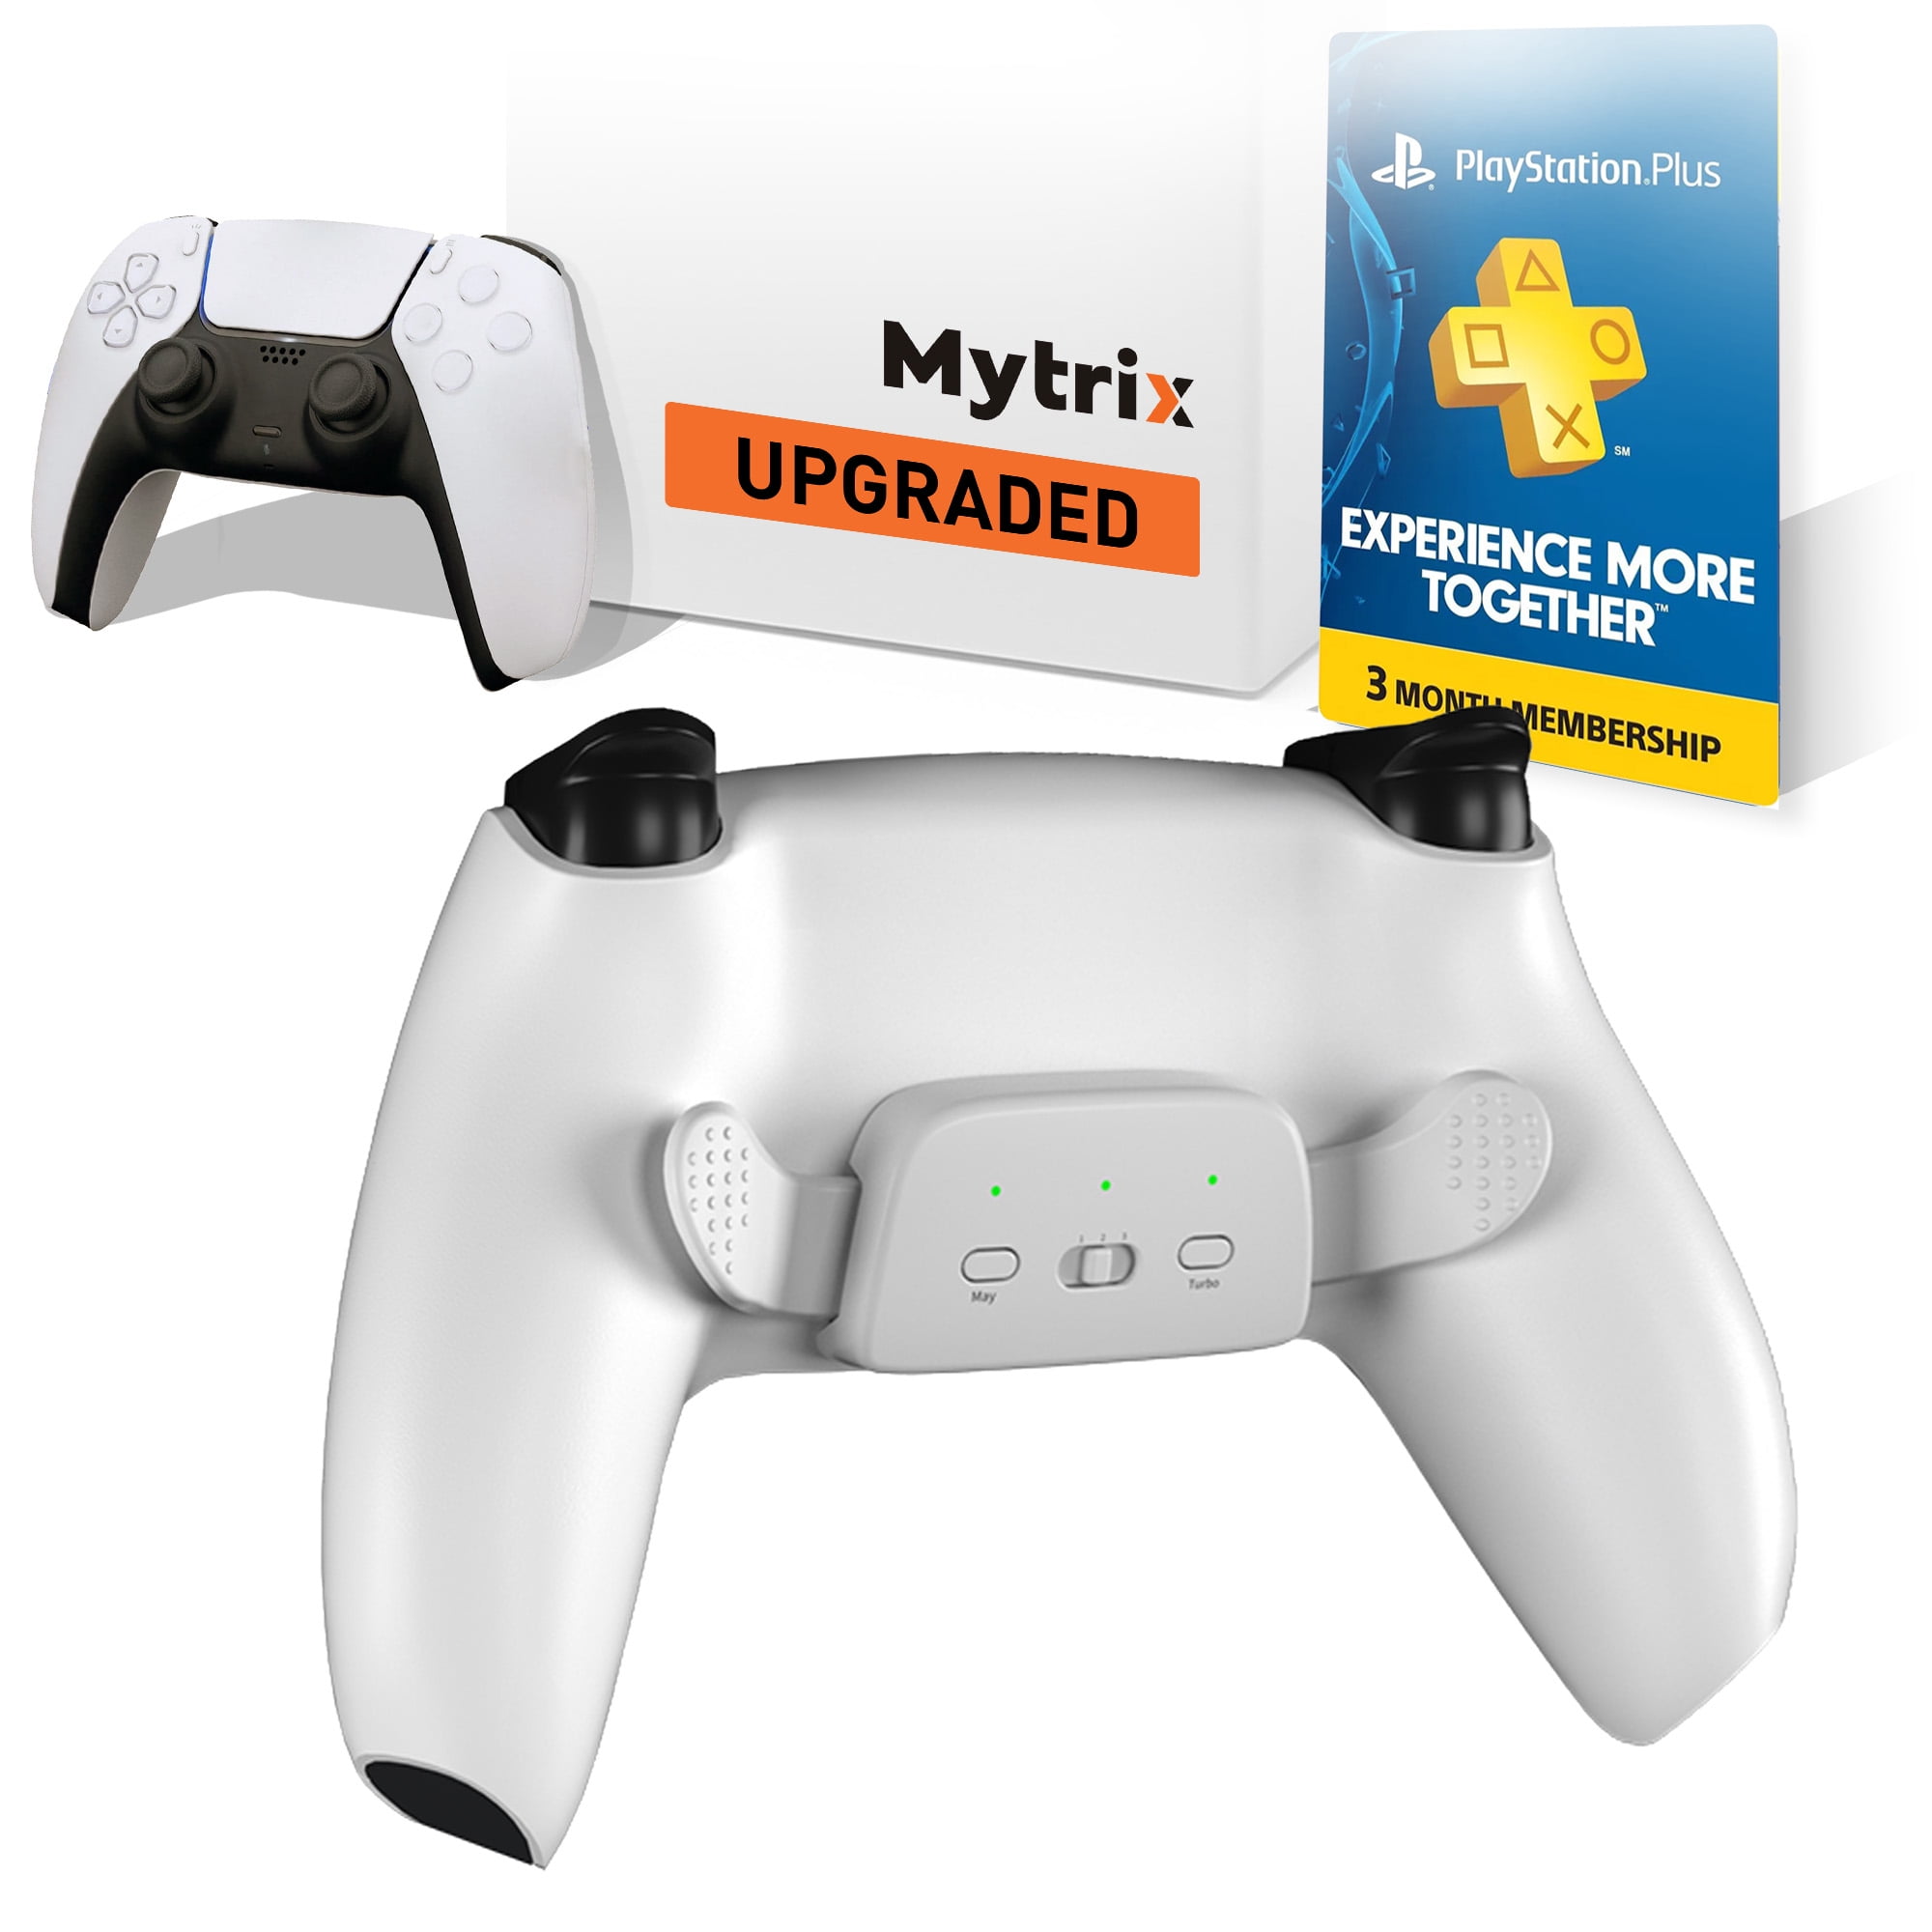 Mytrix Customized Controller With 2 Remappable Paddles For Playstation 5 Ps5 Programmable Back Buttons With Fast Turbo Auto Fire 3 Setup Saving Slots Onboard Switch White With Rainbow 6 Siege Walmart Com